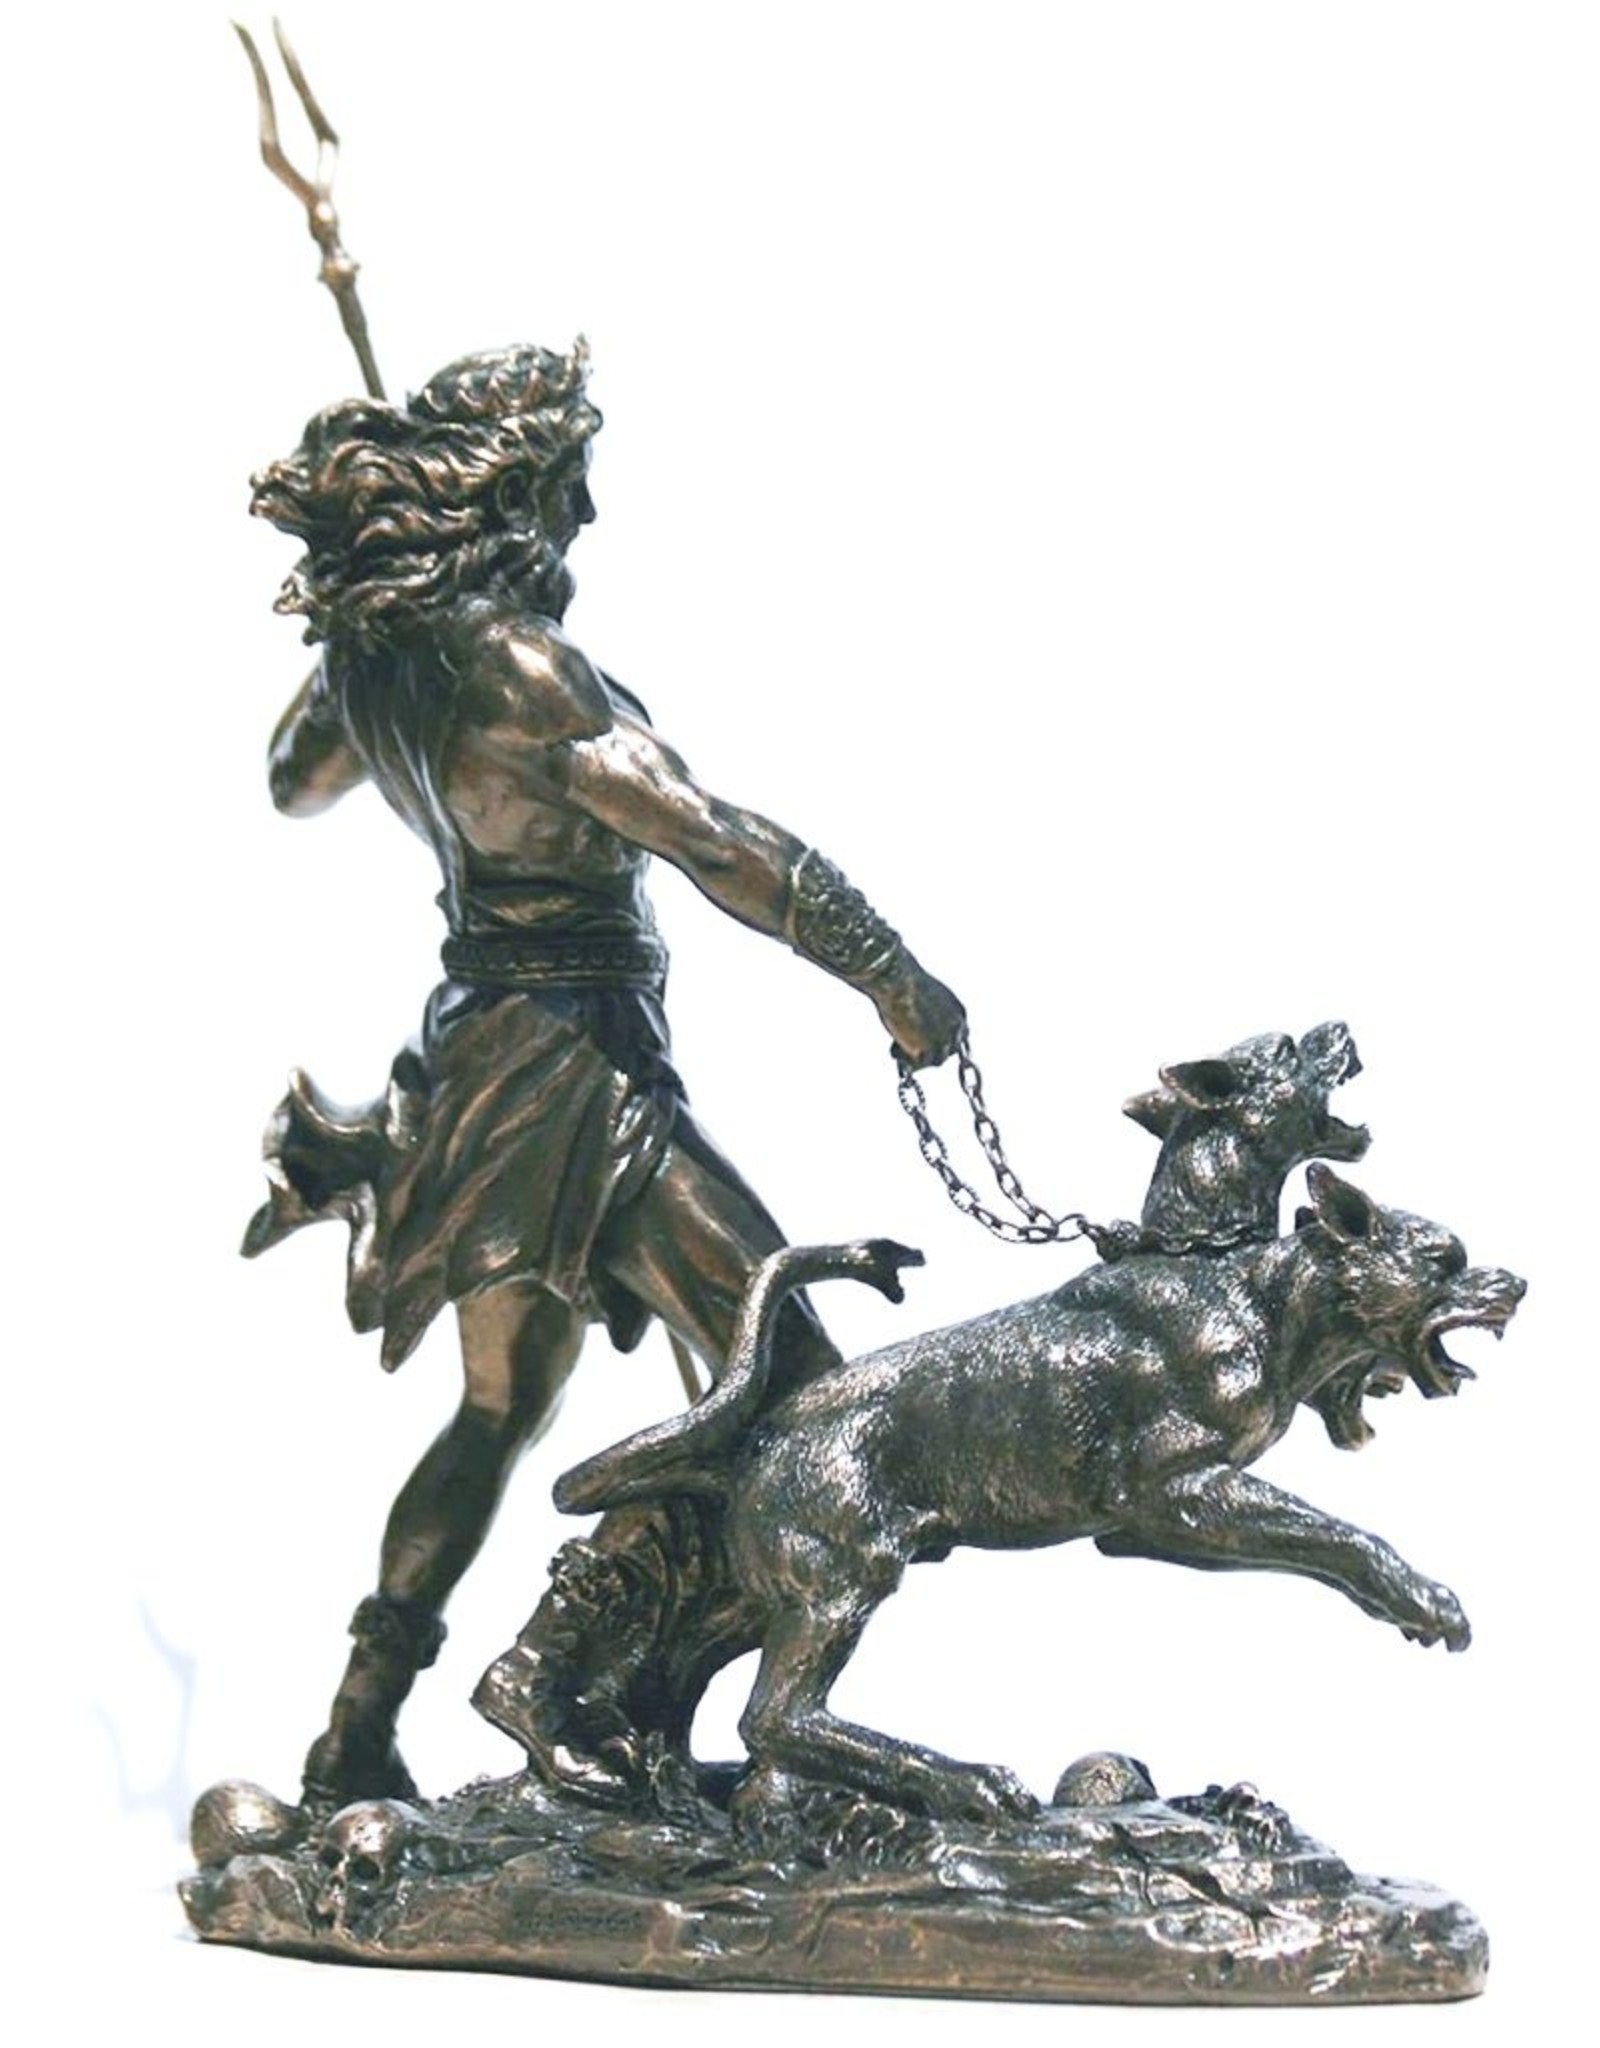 Veronese Design Giftware Figurines Collectables - Hades God of the Underworld with Cerberus Statue